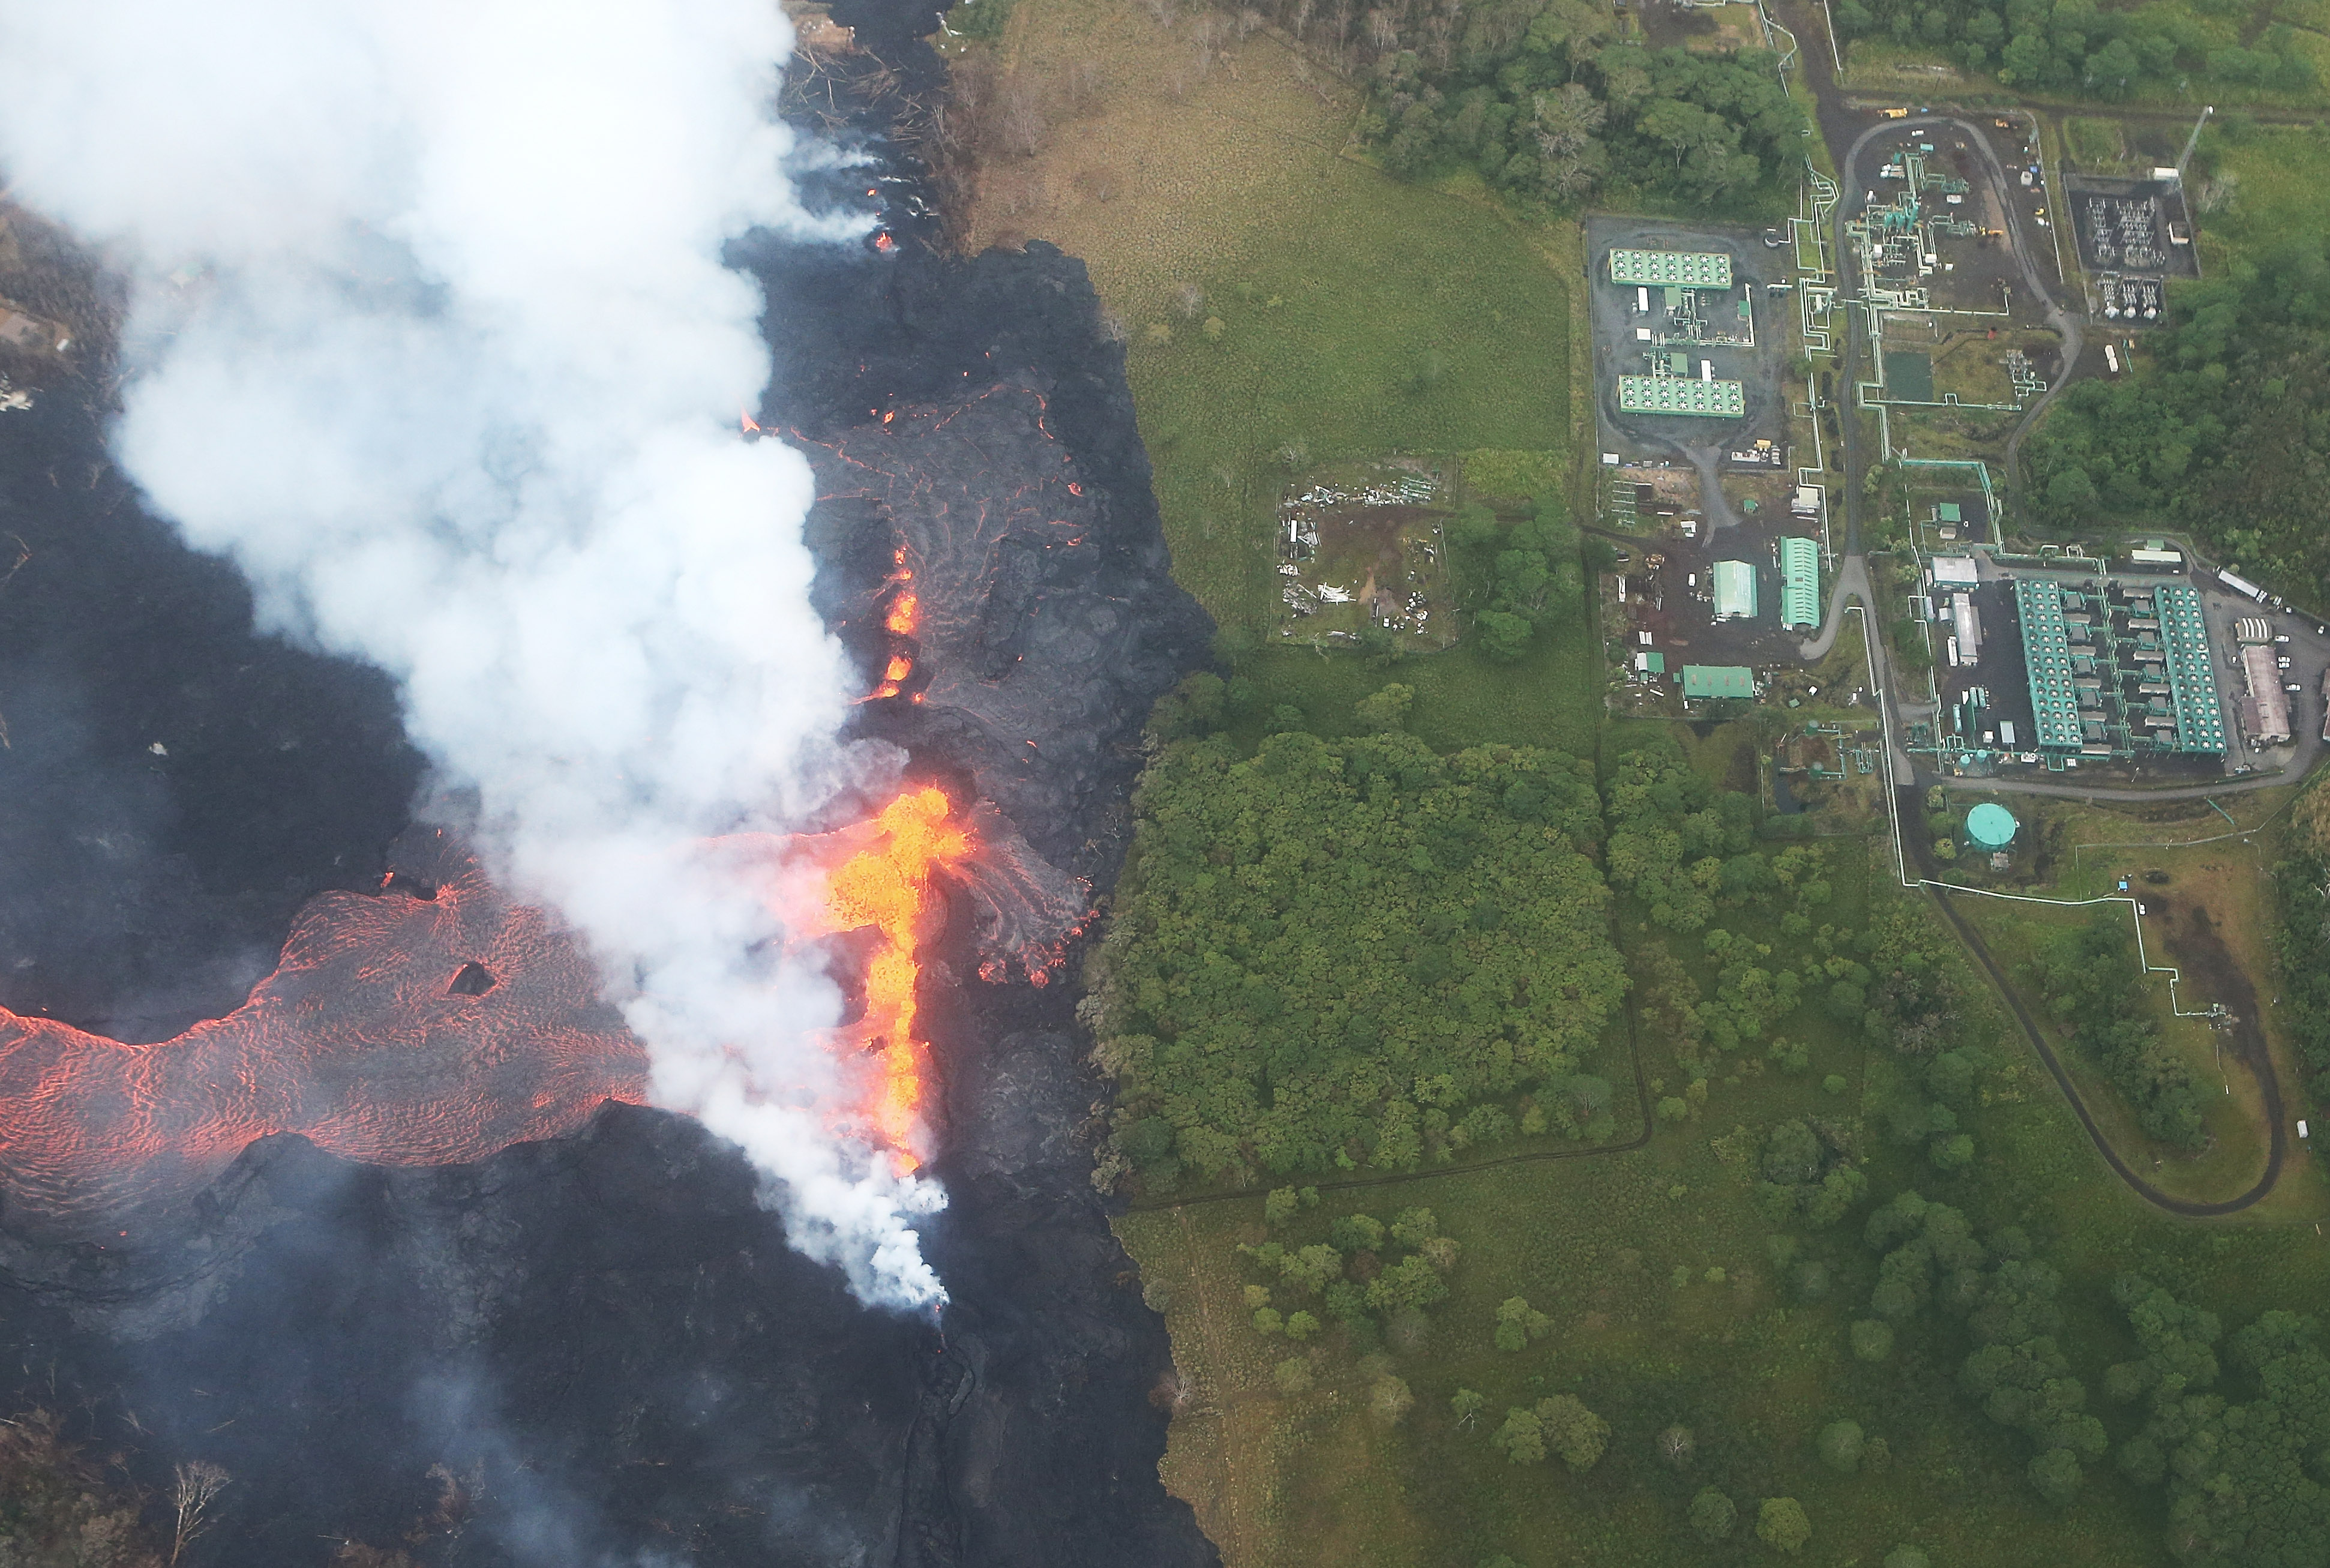 Usgs Map Show Fissure System And Lava Flows